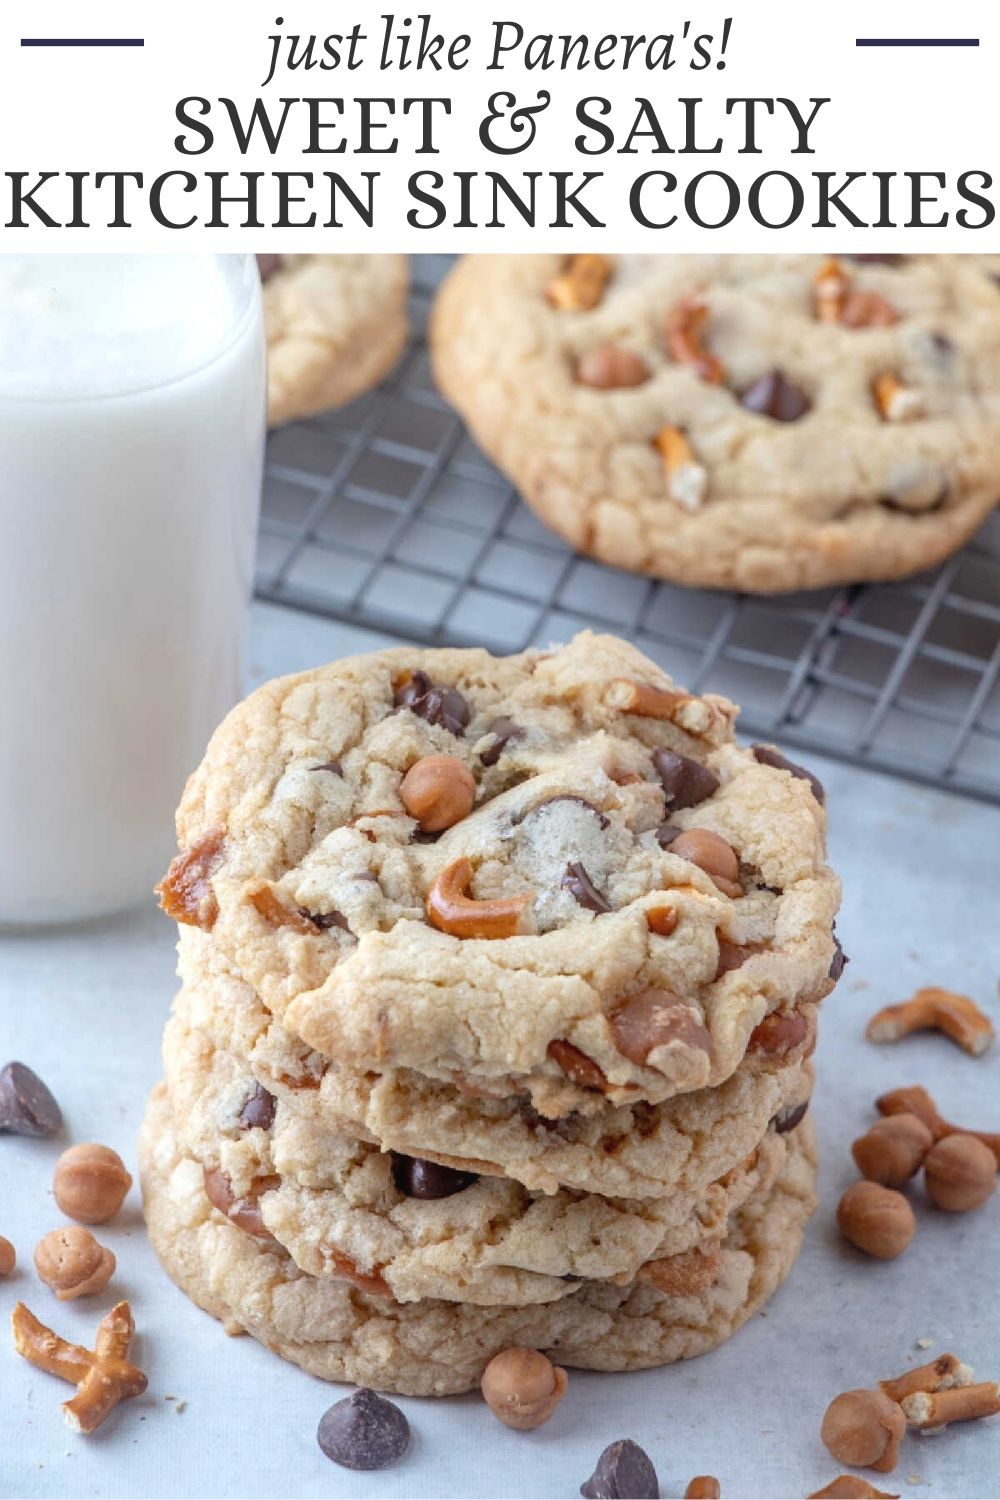 Sweet, salty, crunchy and soft, these kitchen sink cookies have it all. Full of caramel, chocolate and even bits of pretzel. They are based off the Panera kitchen sink cookies.